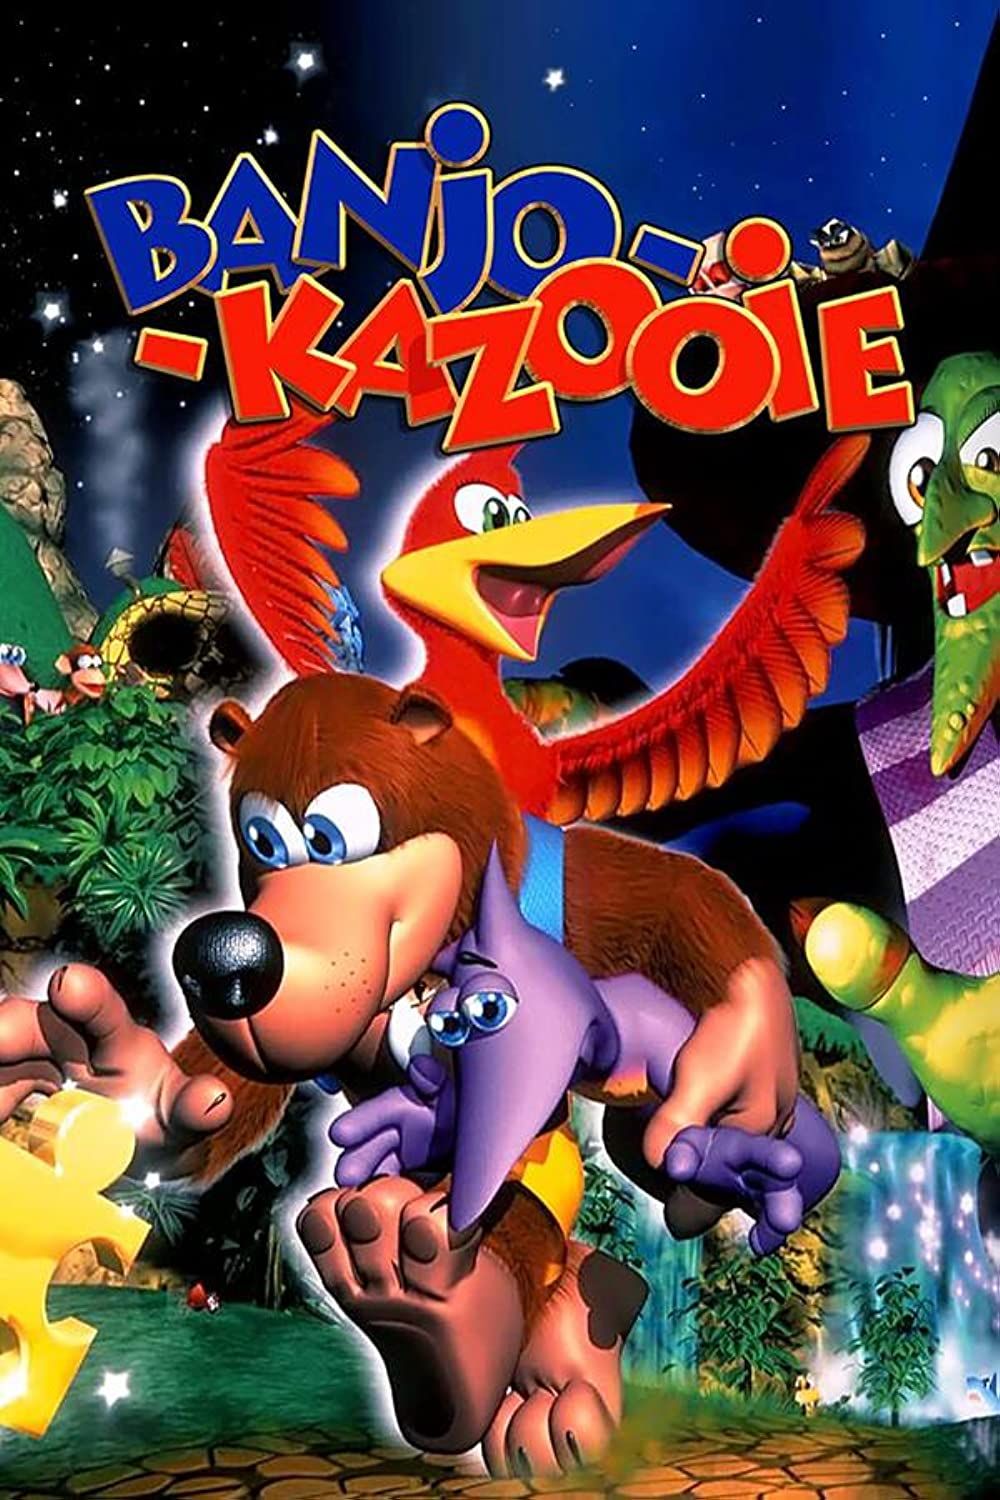 Rumor New BanjoKazooie Game Could Be in Development